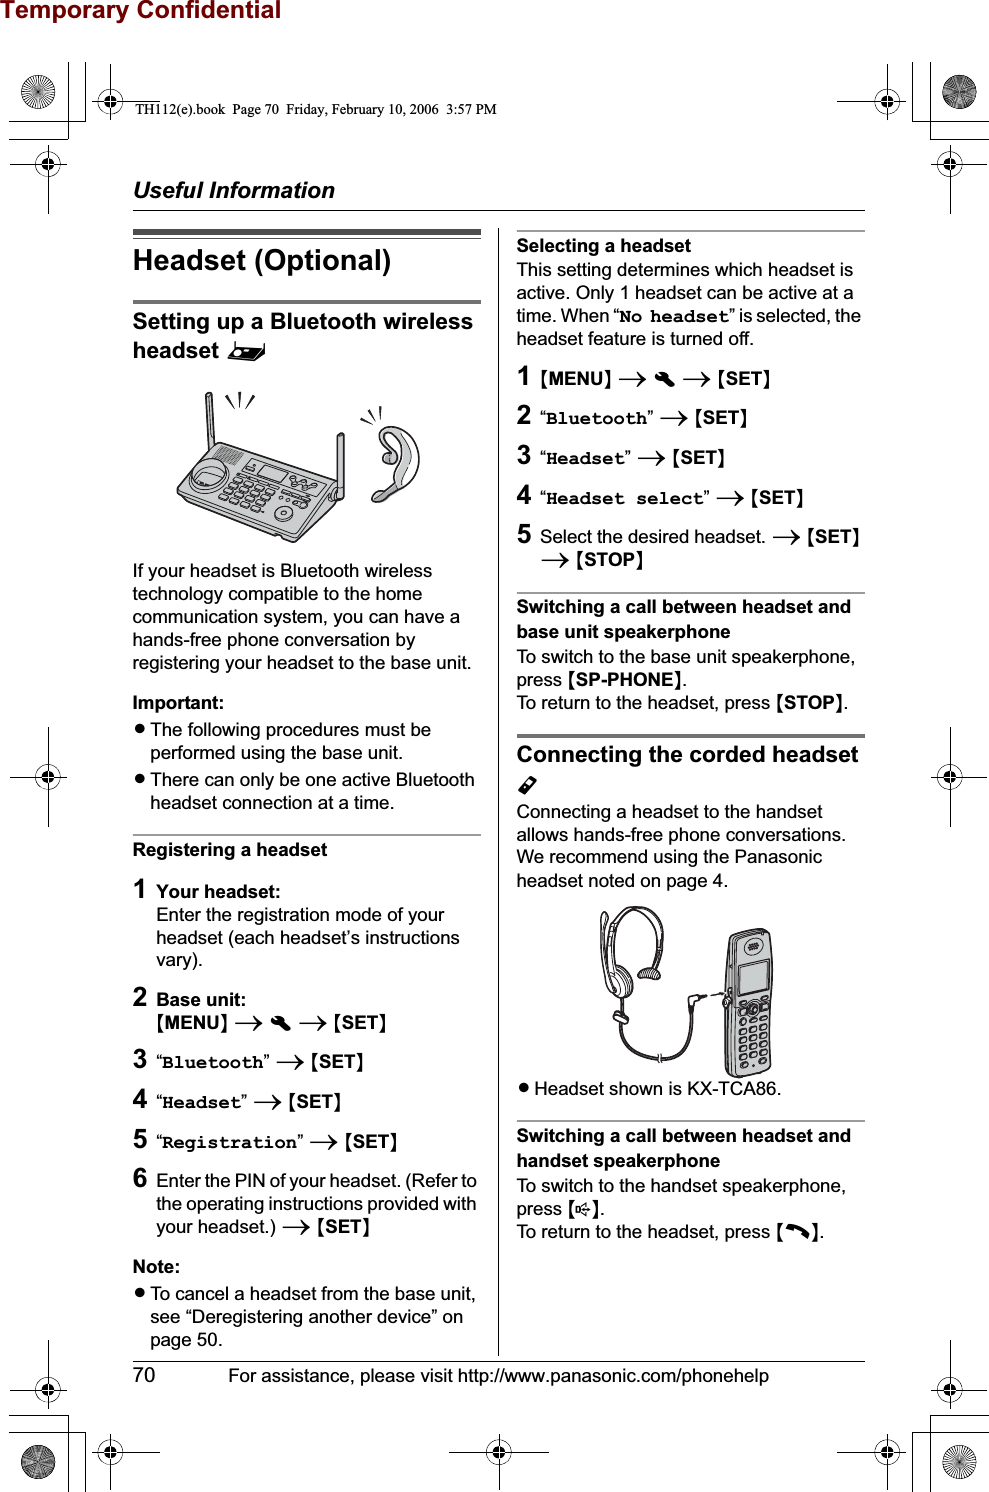 Temporary ConfidentialUseful Information70 For assistance, please visit http://www.panasonic.com/phonehelpHeadset (Optional)Setting up a Bluetooth wireless headset ^If your headset is Bluetooth wireless technology compatible to the home communication system, you can have a hands-free phone conversation by registering your headset to the base unit.Important:LThe following procedures must be performed using the base unit.LThere can only be one active Bluetooth headset connection at a time.Registering a headset1Your headset:Enter the registration mode of your headset (each headset’s instructions vary).2Base unit:{MENU}ihi{SET}3“Bluetooth”i{SET}4“Headset”i{SET}5“Registration”i{SET}6Enter the PIN of your headset. (Refer to the operating instructions provided with your headset.) i{SET}Note:LTo cancel a headset from the base unit, see “Deregistering another device” on page 50.Selecting a headsetThis setting determines which headset is active. Only 1 headset can be active at a time. When “No headset” is selected, the headset feature is turned off.1{MENU}ihi{SET}2“Bluetooth”i{SET}3“Headset”i{SET}4“Headset select”i{SET}5Select the desired headset. i{SET}i{STOP}Switching a call between headset and base unit speakerphoneTo switch to the base unit speakerphone, press {SP-PHONE}.To return to the headset, press {STOP}.Connecting the corded headset YConnecting a headset to the handset allows hands-free phone conversations. We recommend using the Panasonic headset noted on page 4.LHeadset shown is KX-TCA86.Switching a call between headset and handset speakerphoneTo switch to the handset speakerphone, press {s}.To return to the headset, press {C}.TH112(e).book  Page 70  Friday, February 10, 2006  3:57 PM